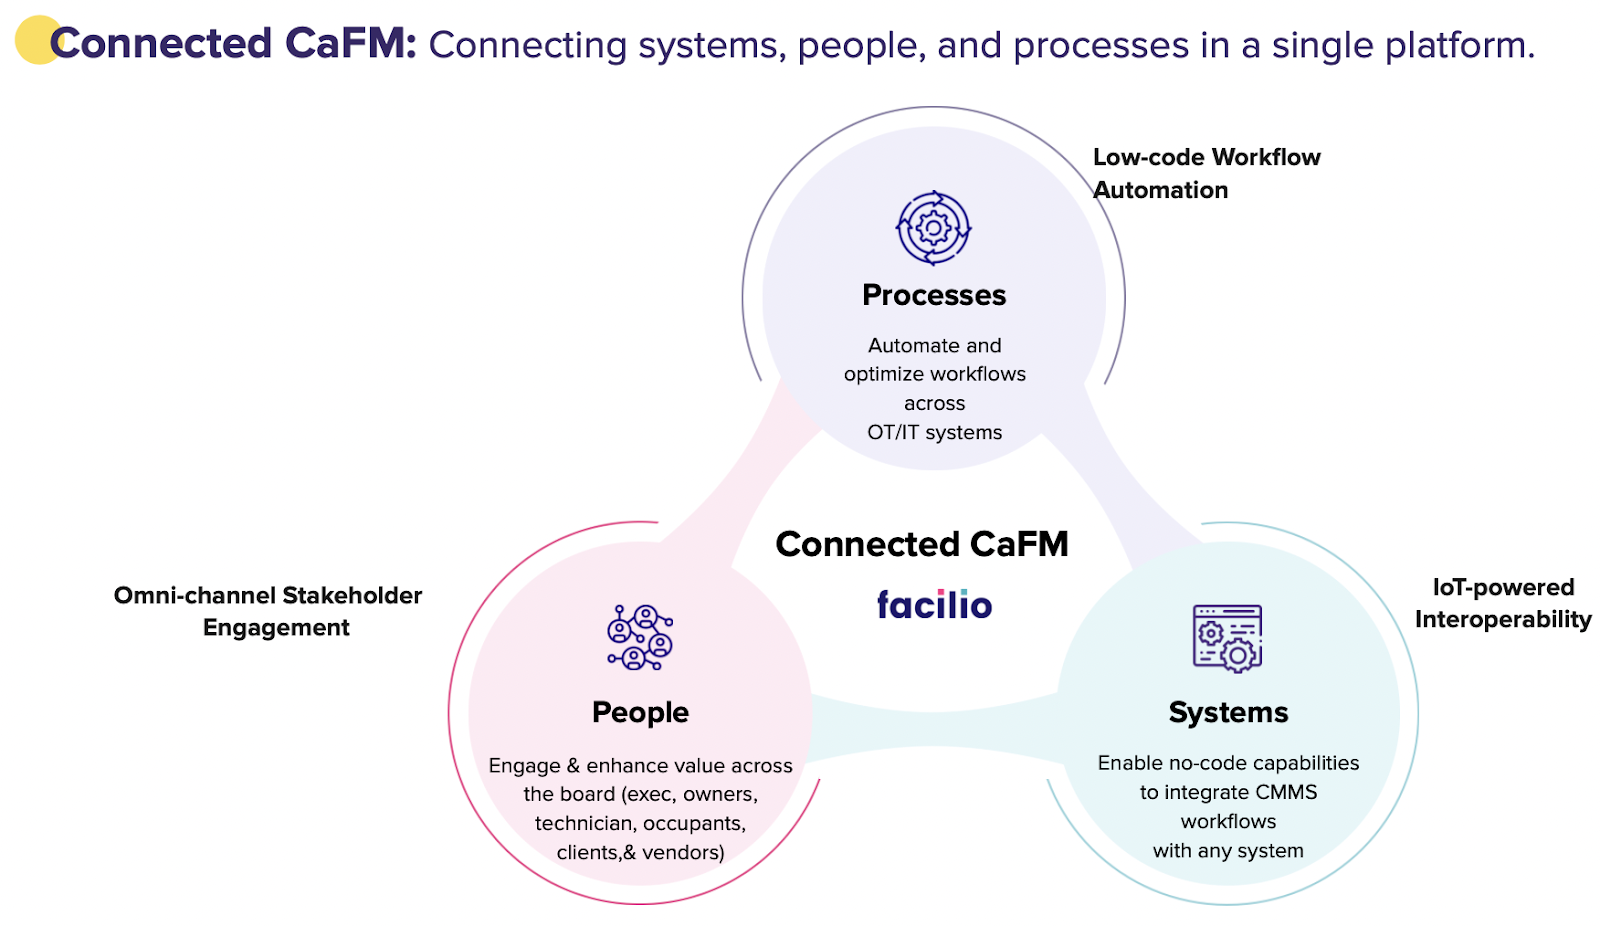 An infographic representing the concept of Connected CaFM